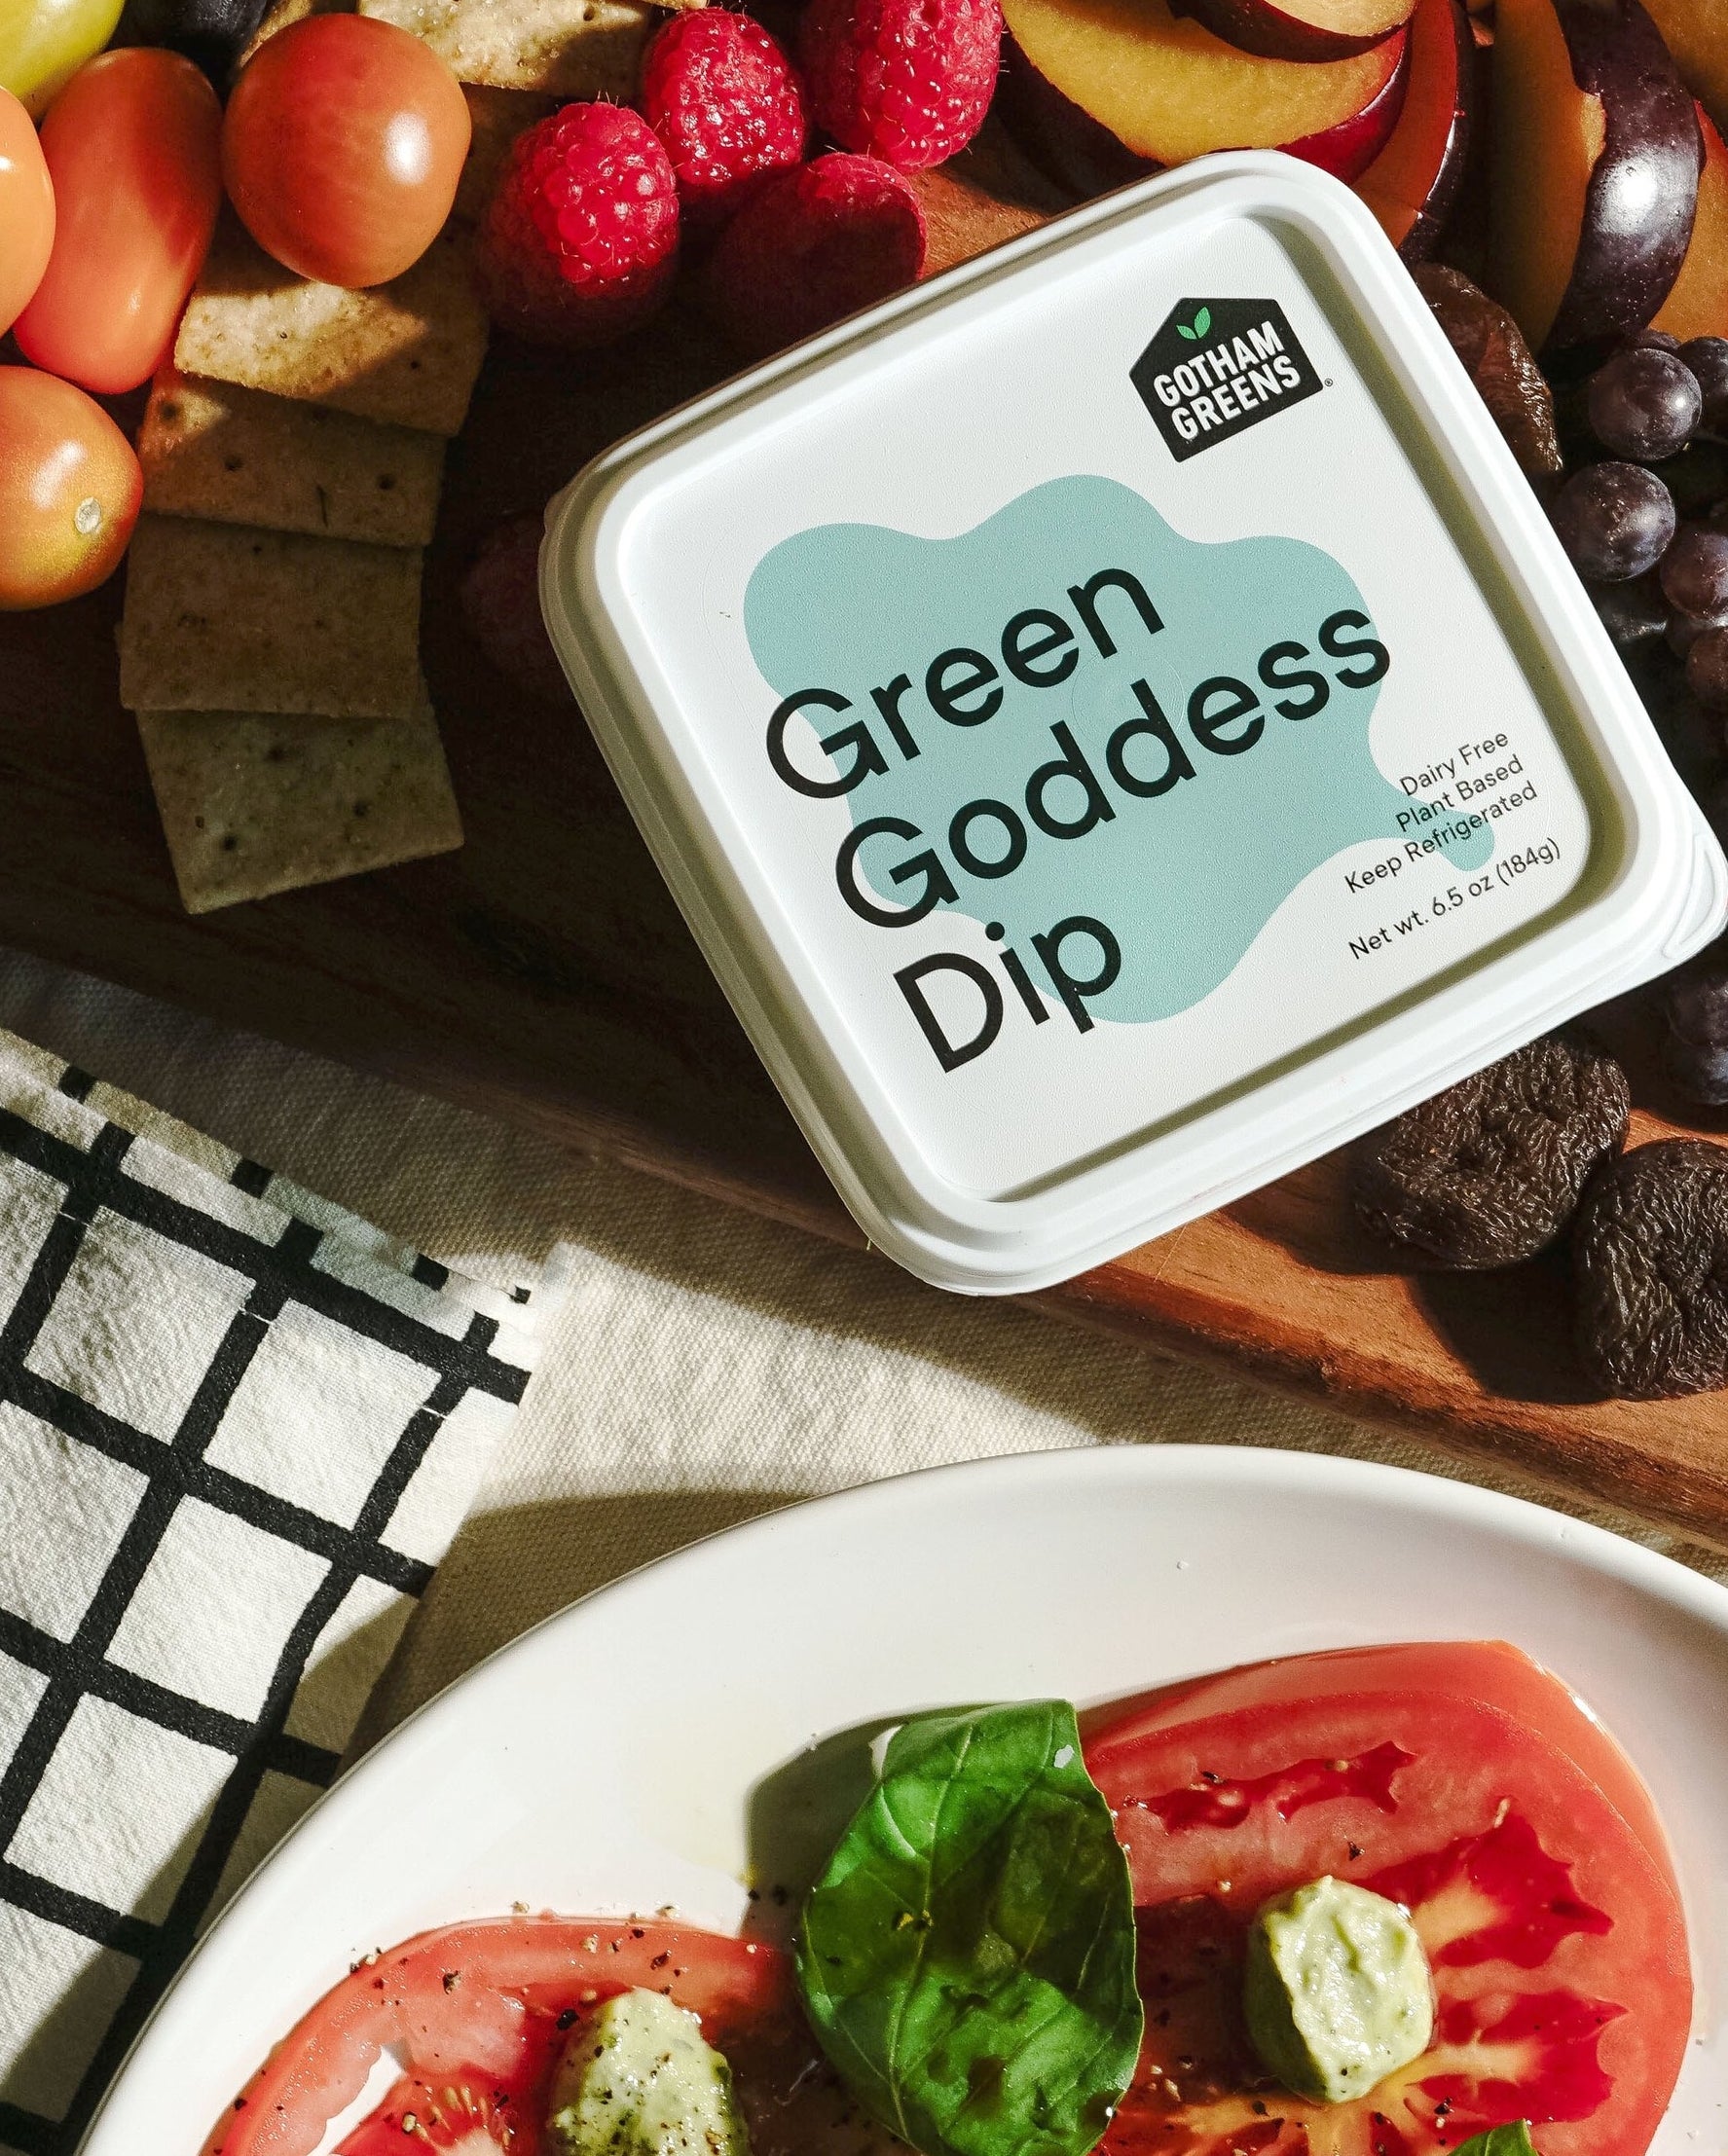 50 Plant Based Grocery Brands To Try in 2022